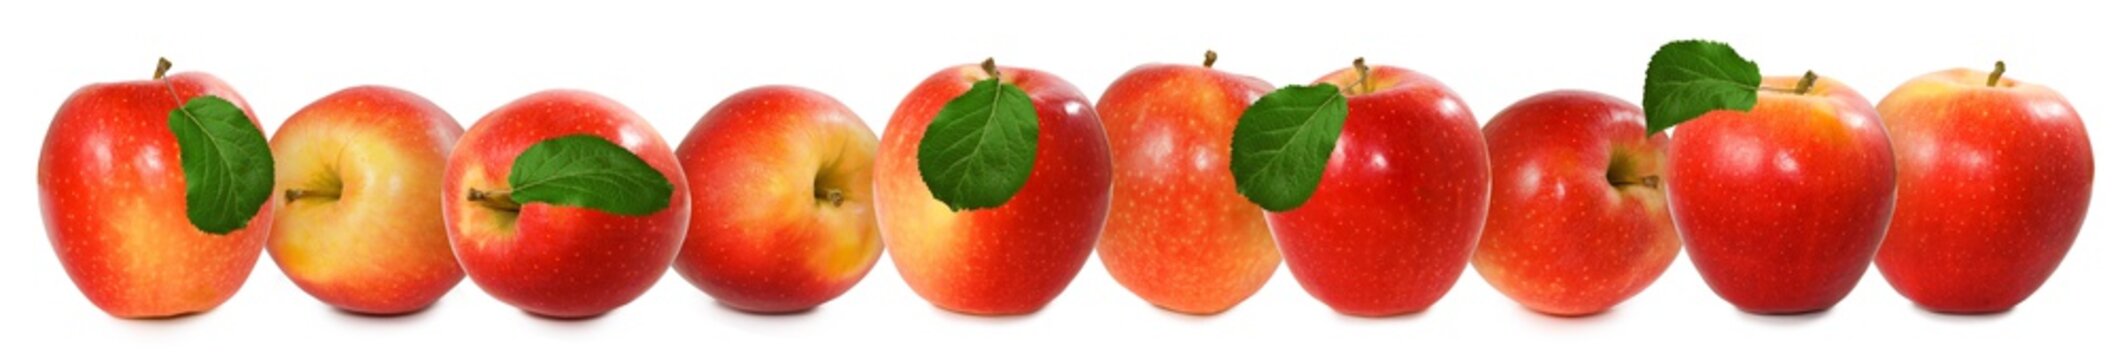 close-up isolated image of apples on a white background